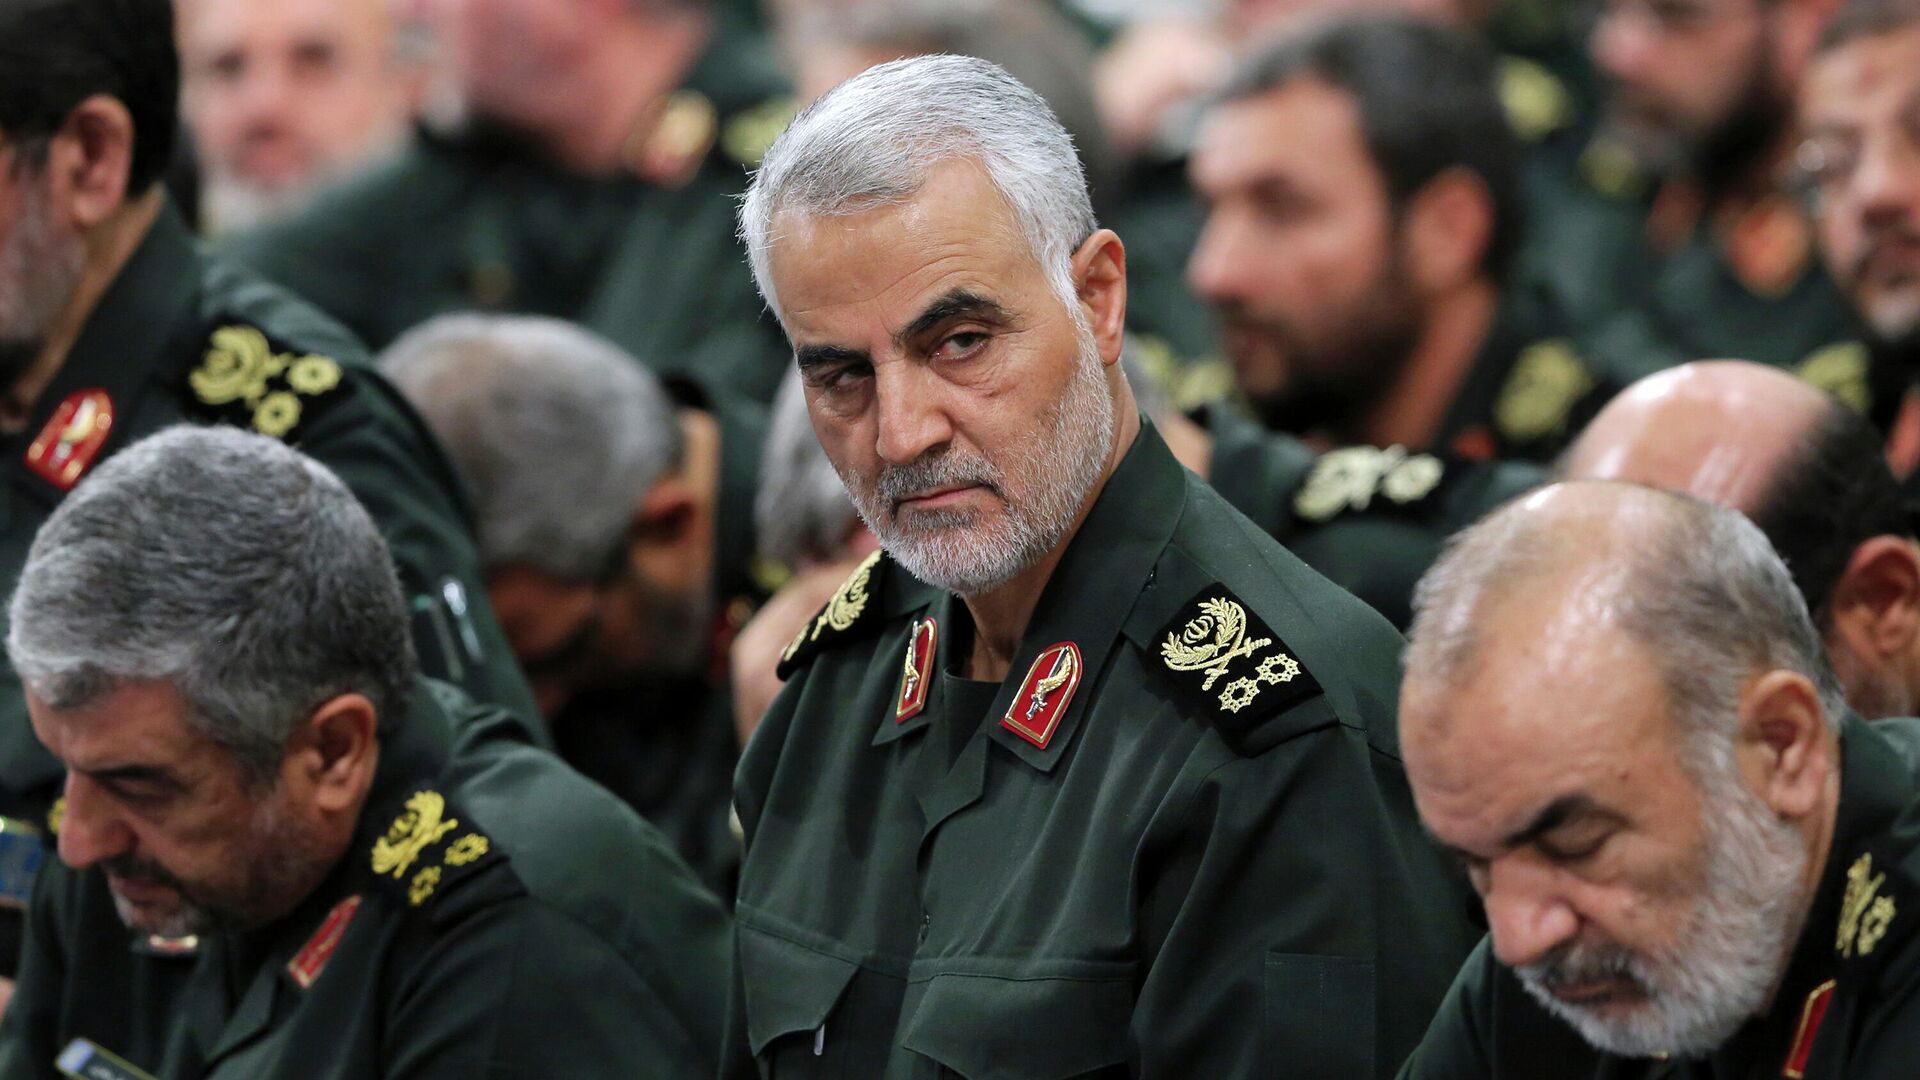 In this Sept. 18, 2016, file photo provided by an official website of the office of the Iranian supreme leader, Revolutionary Guard Gen. Qassem Soleimani, center, attends a meeting in Tehran, Iran. Iran executed Mahmoud Mousavi Majd convicted of providing information to the United States and Israel about the prominent Revolutionary Guard general later killed by a U.S. drone strike, state TV reported on Monday, July 20, 2020. (Office of the Iranian Supreme Leader via AP, File) - Sputnik International, 1920, 13.04.2022